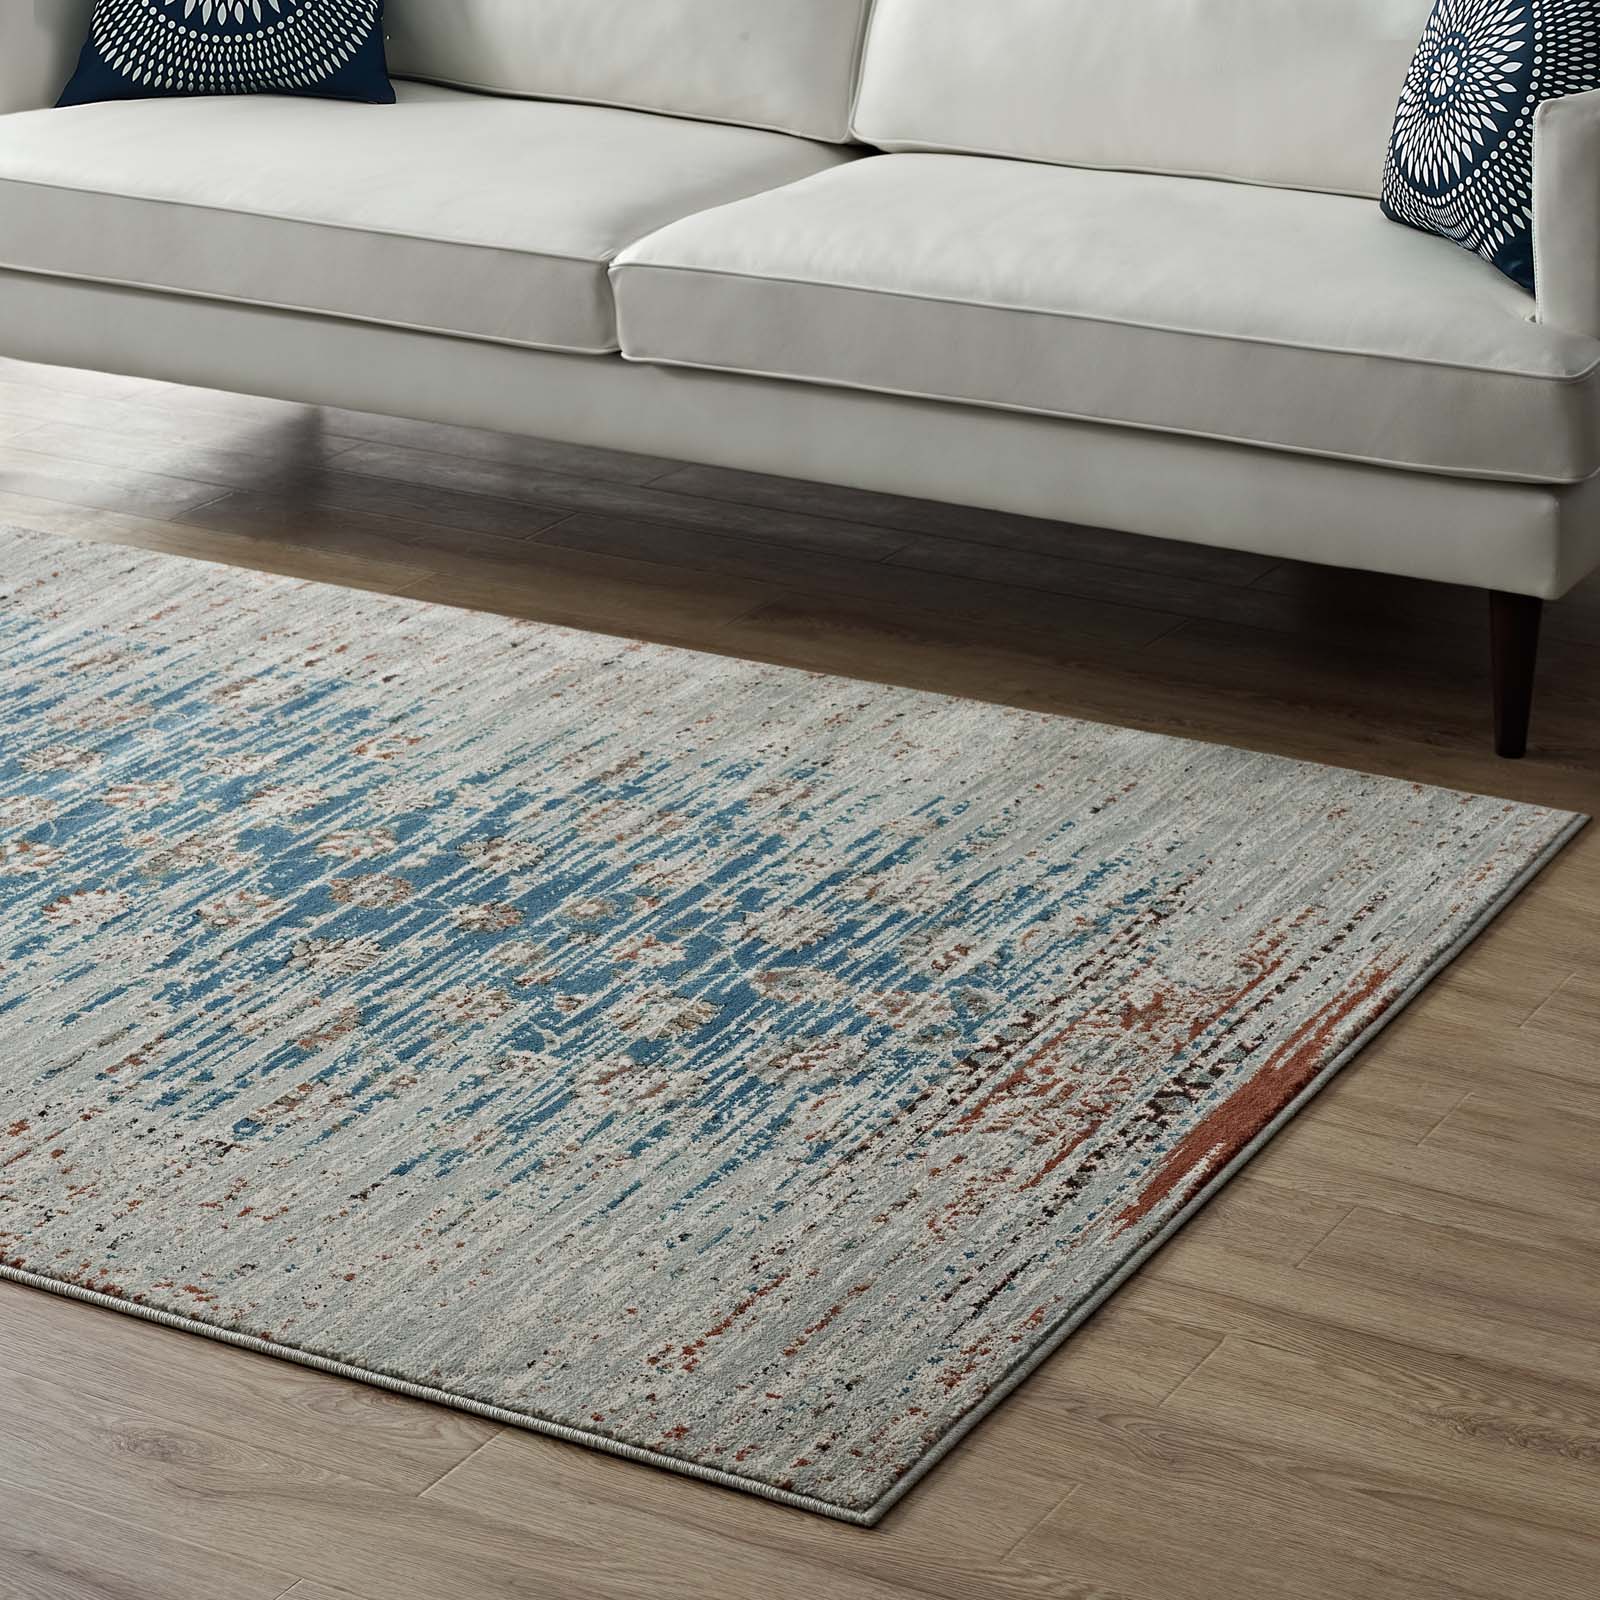 Modway Indoor Rugs - Hesper Distressed Contemporary Floral Lattice 5x8 Area Rug Teal & Beige